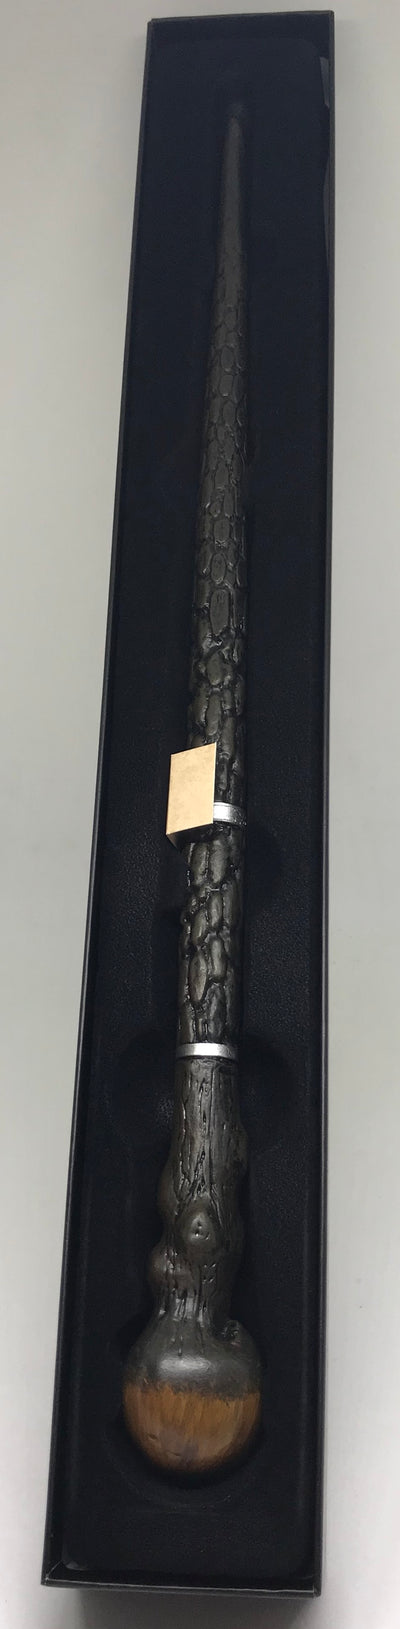 Universal Studios Mad Eye Moody's Wand From Harry Potter New with Box